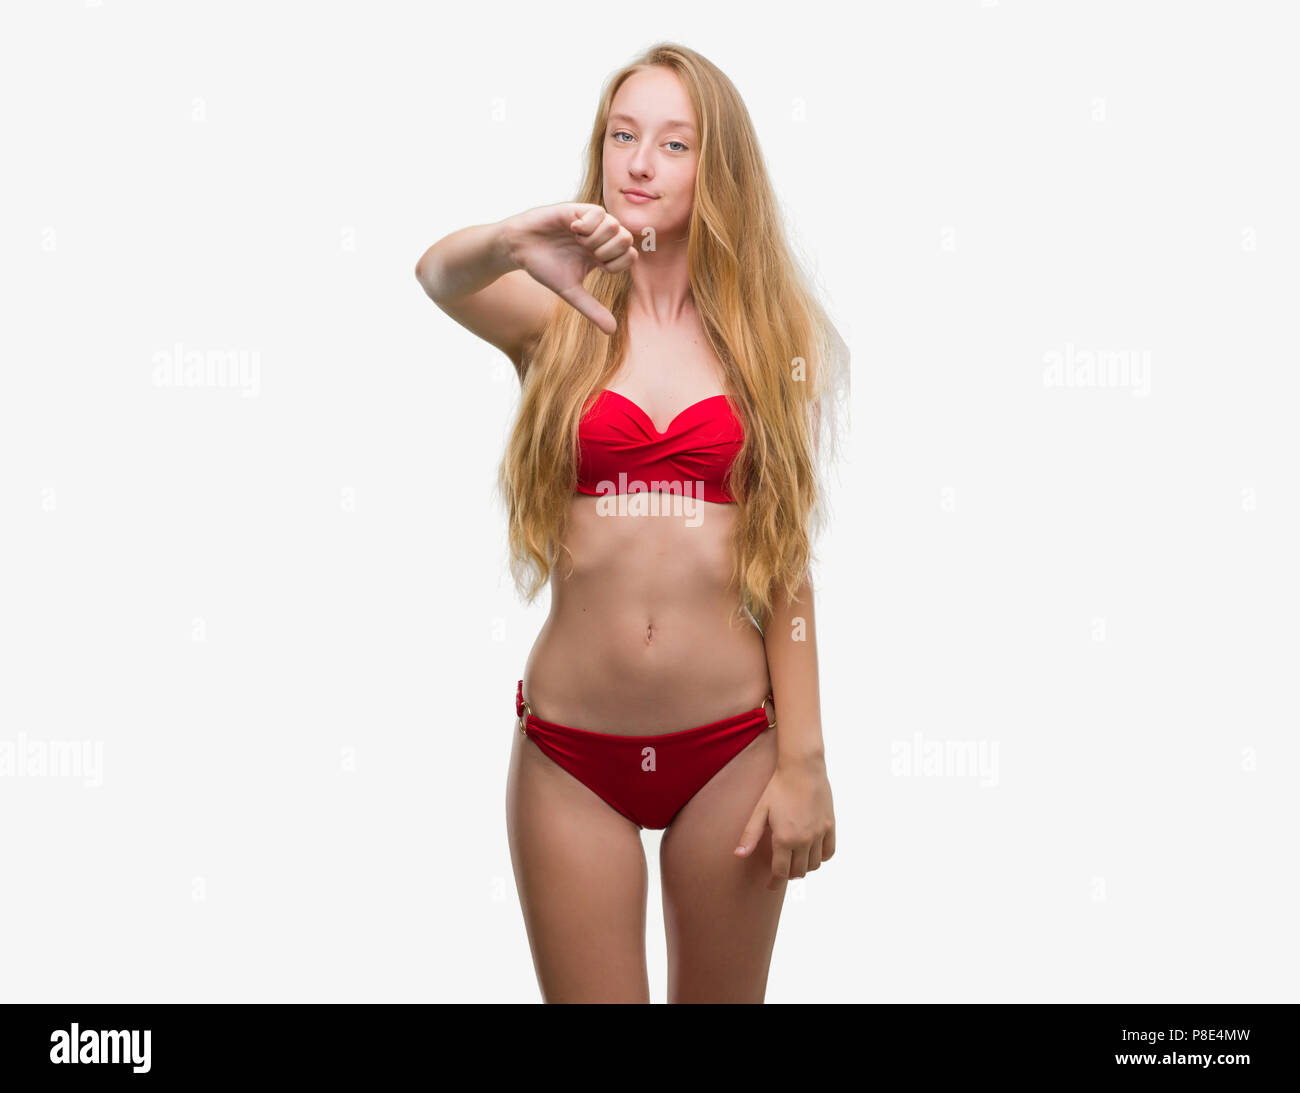 Blonde teenager woman wearing red bikini looking unhappy and angry showing  rejection and negative with thumbs down gesture. Bad expression Stock Photo  - Alamy